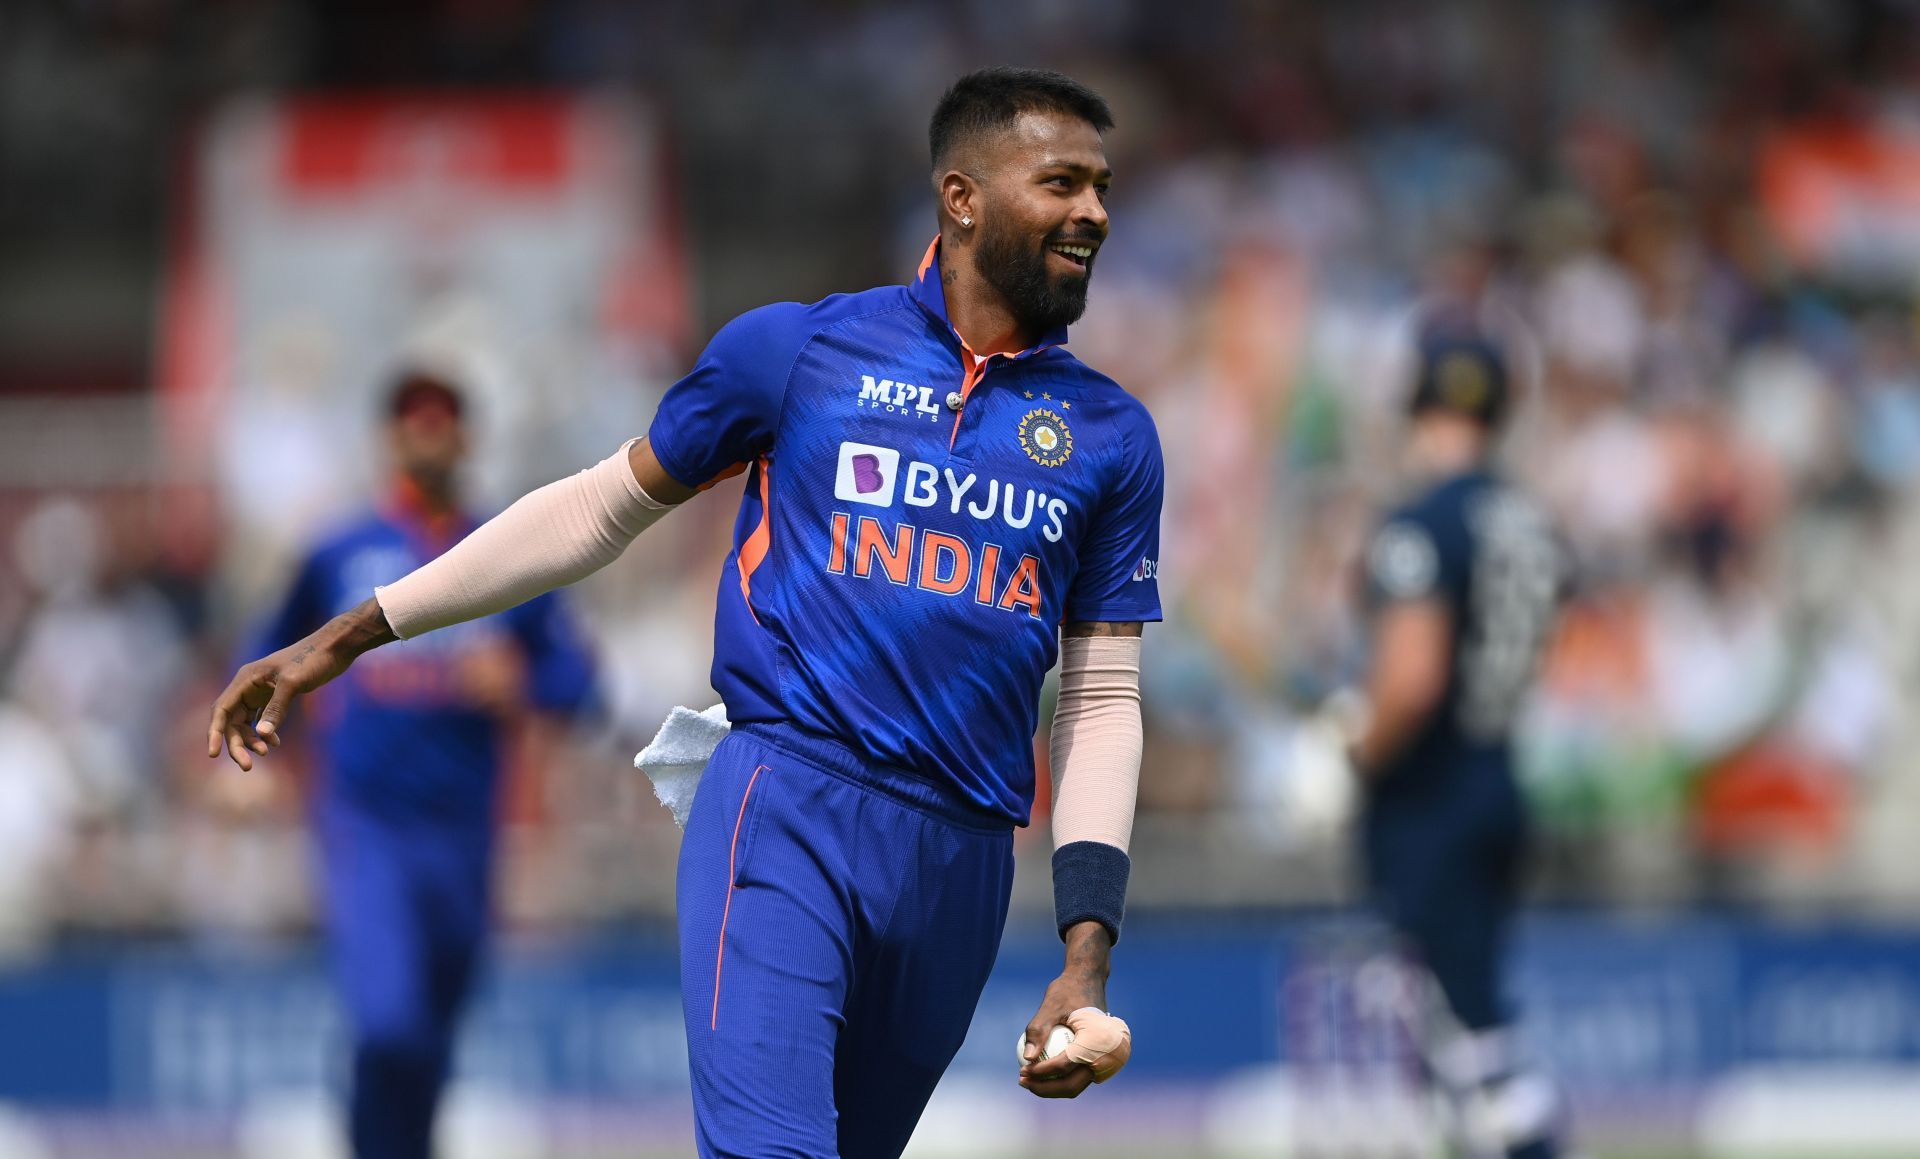 Hardik Pandya stood out with his all-round performances against England